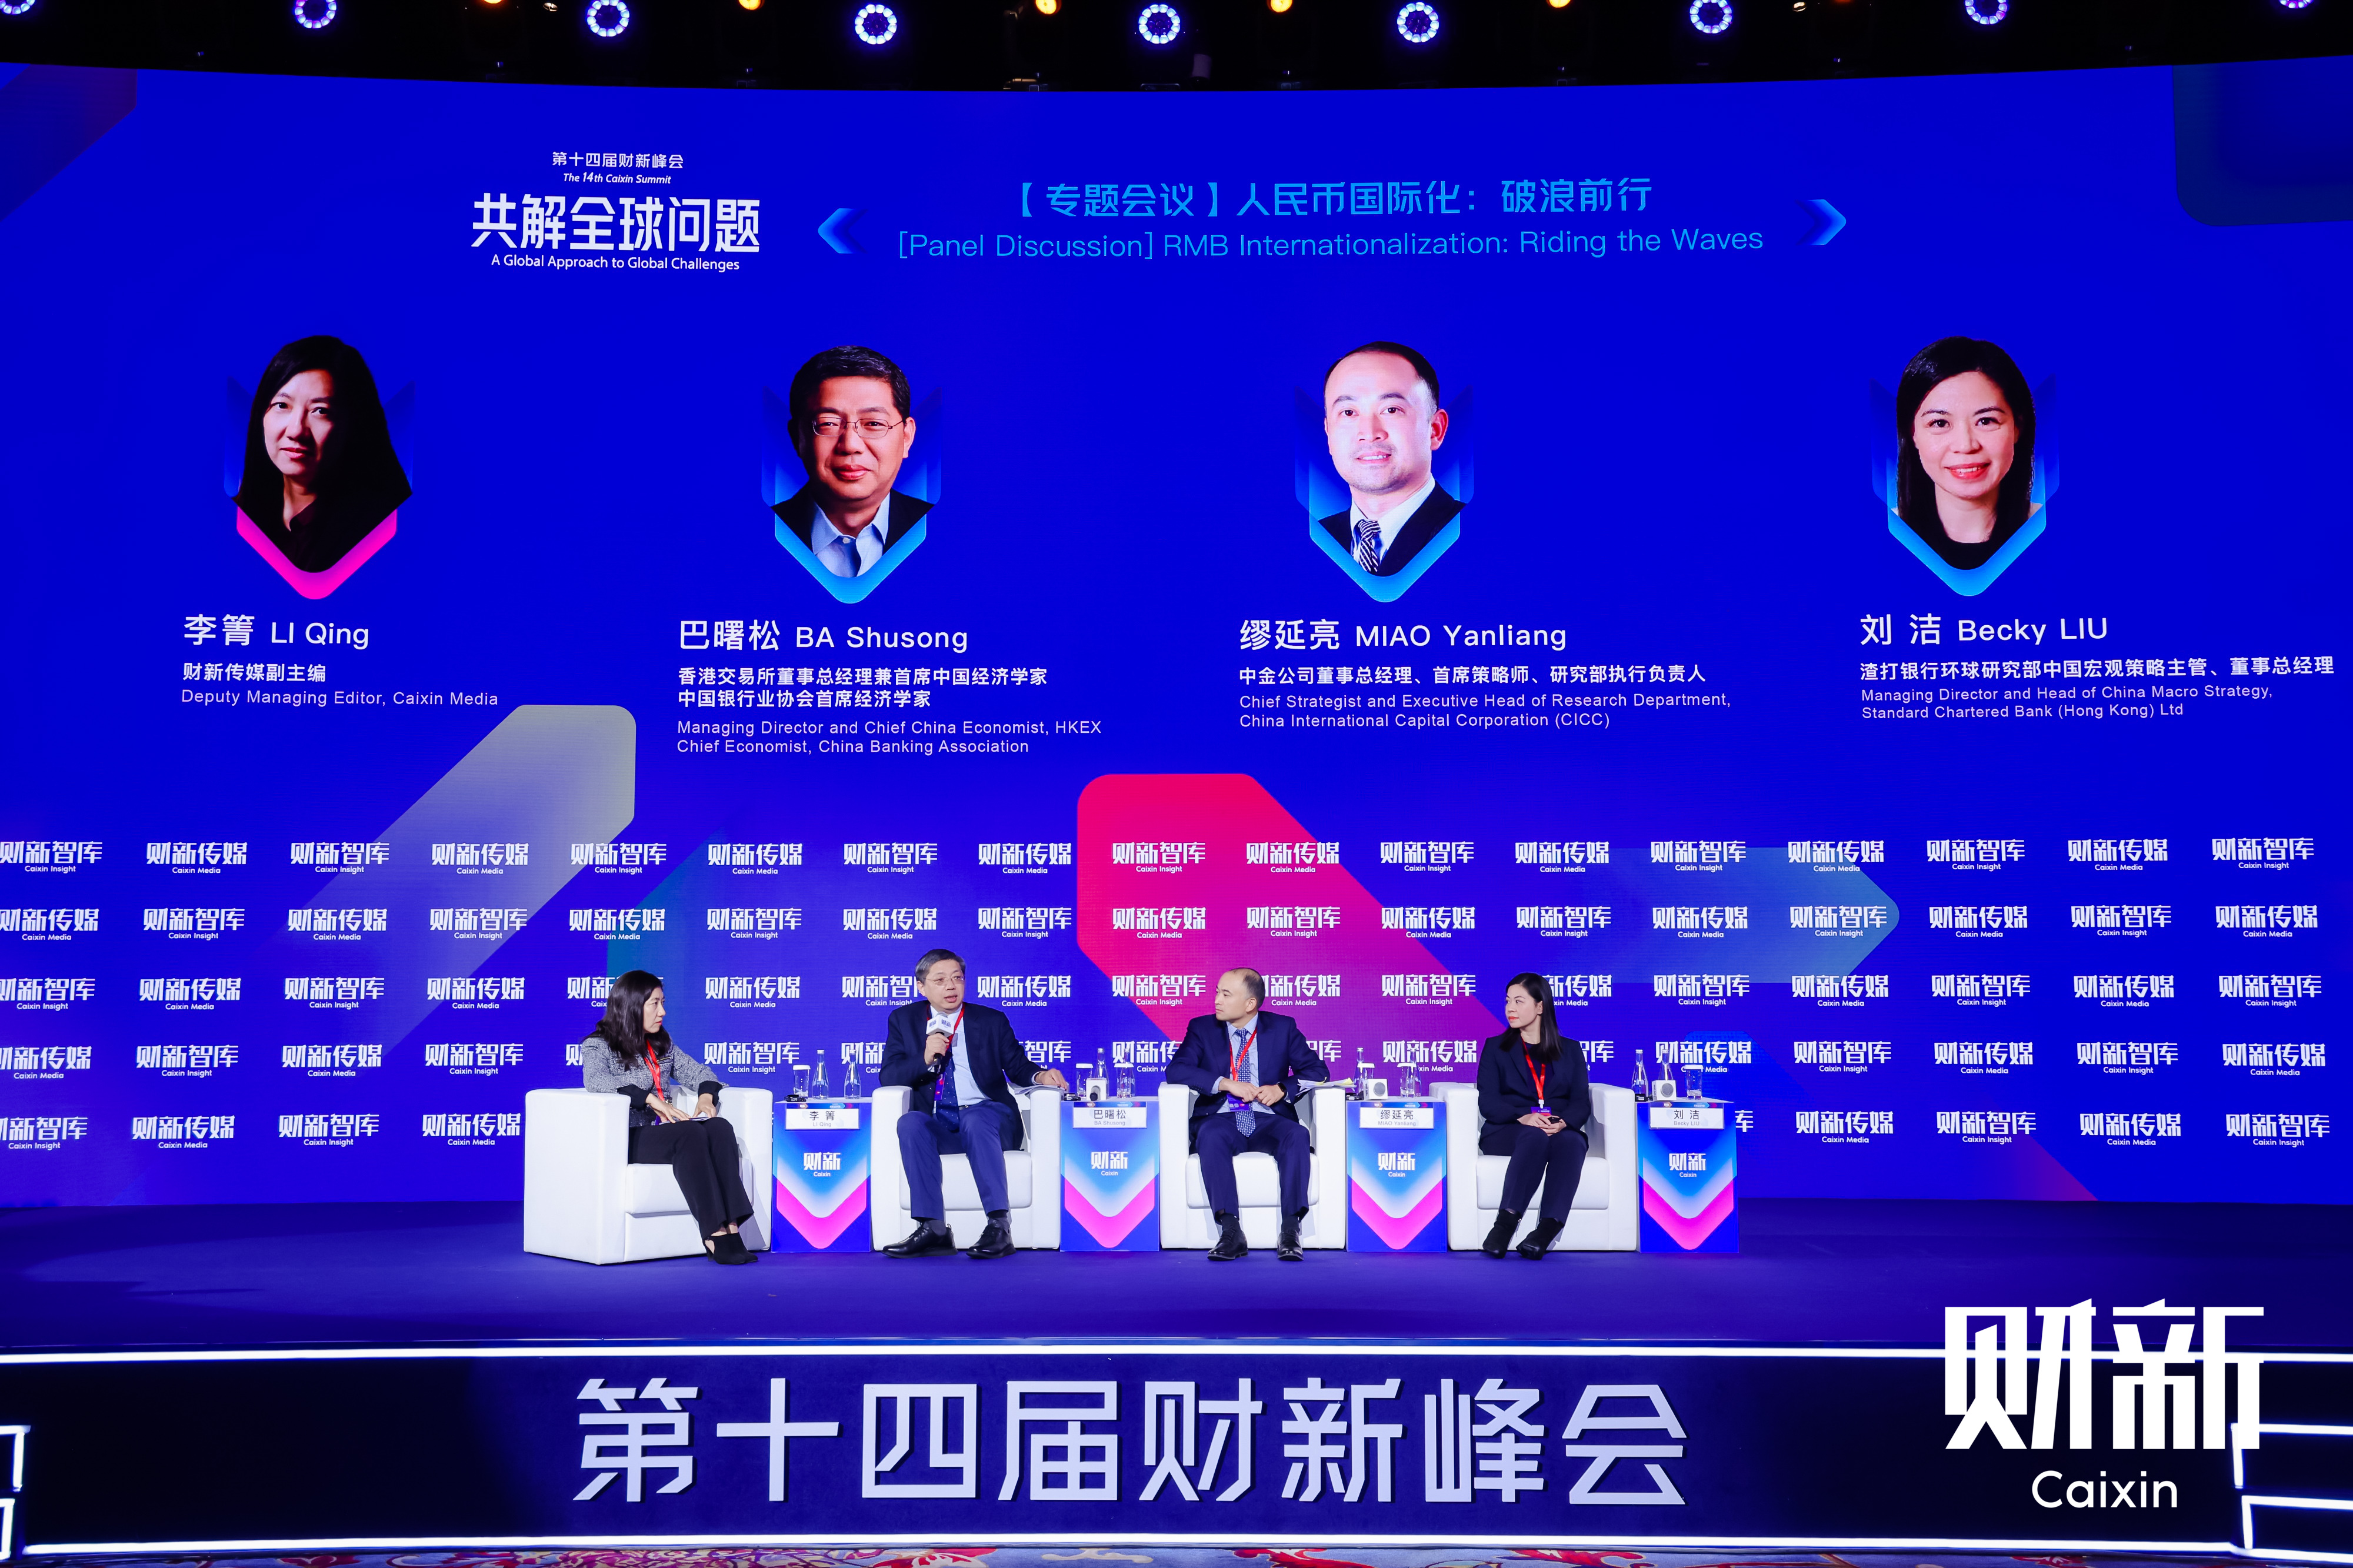 Guests speak at a panel on RMB internationalization on Friday at the 14th Caixin Summit in Beijing. The three-day event brought together business leaders, experts and scholars who offered key insights on pivotal China-related topics. Photo: Caixin